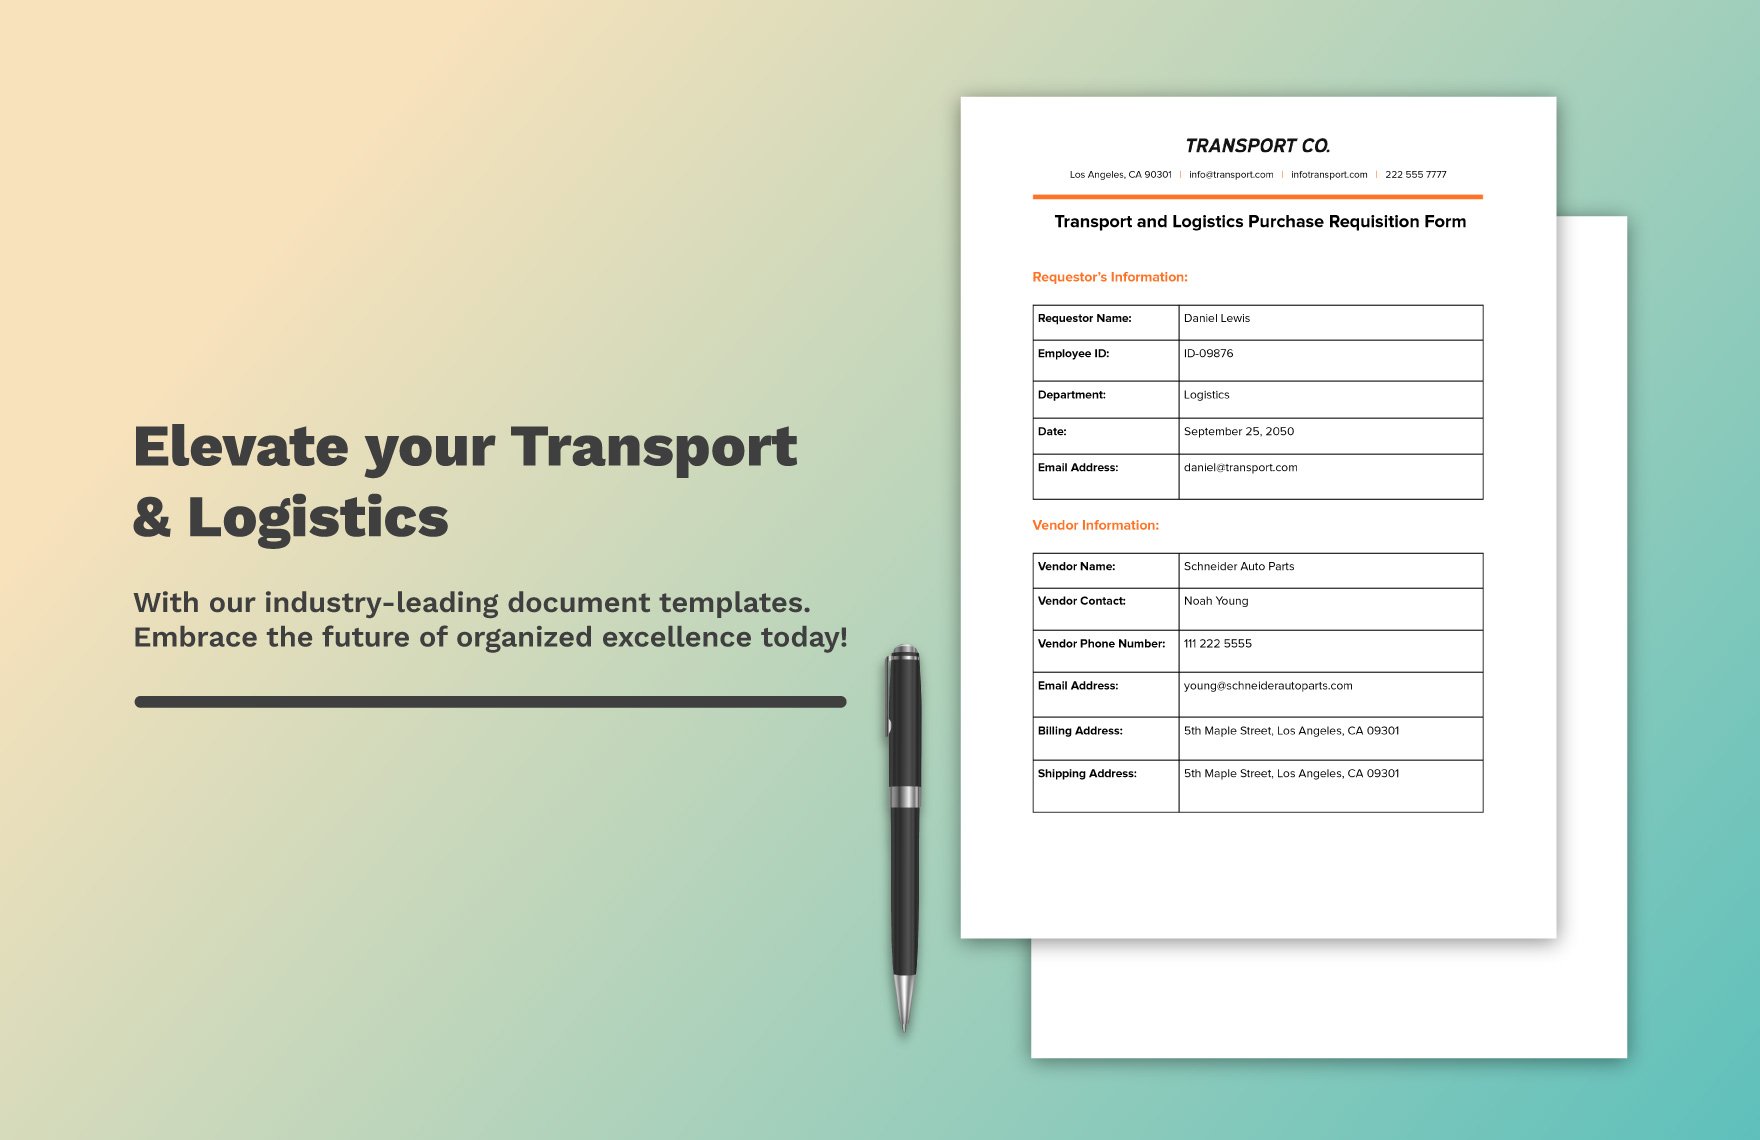 Transport and Logistics Purchase Requisition Form Template